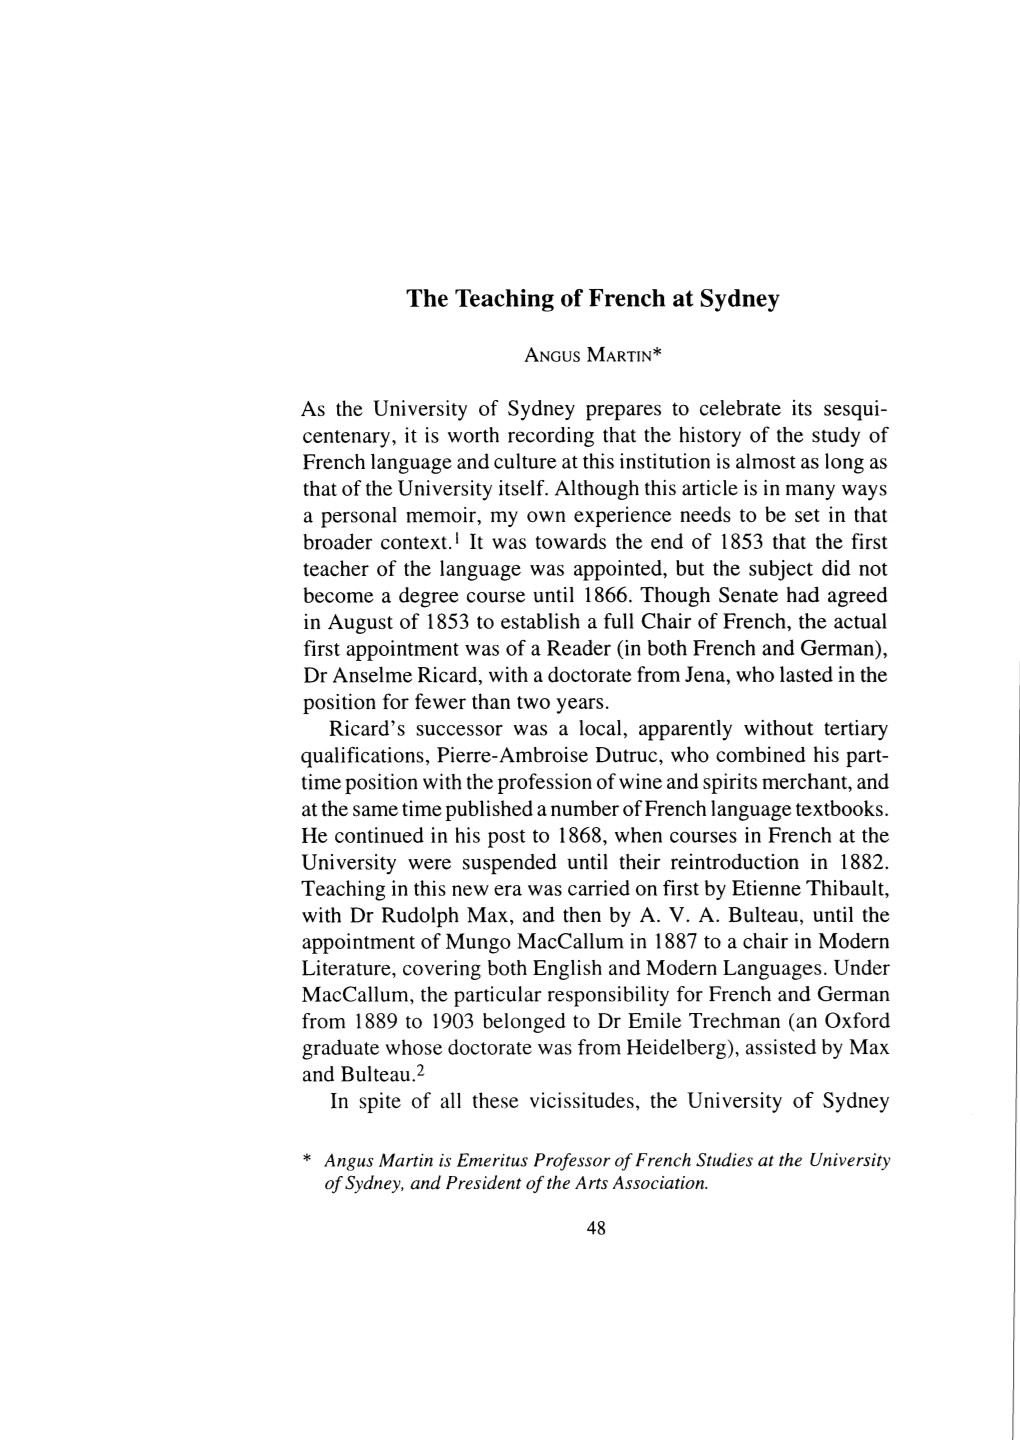 The Teaching of French at Sydney